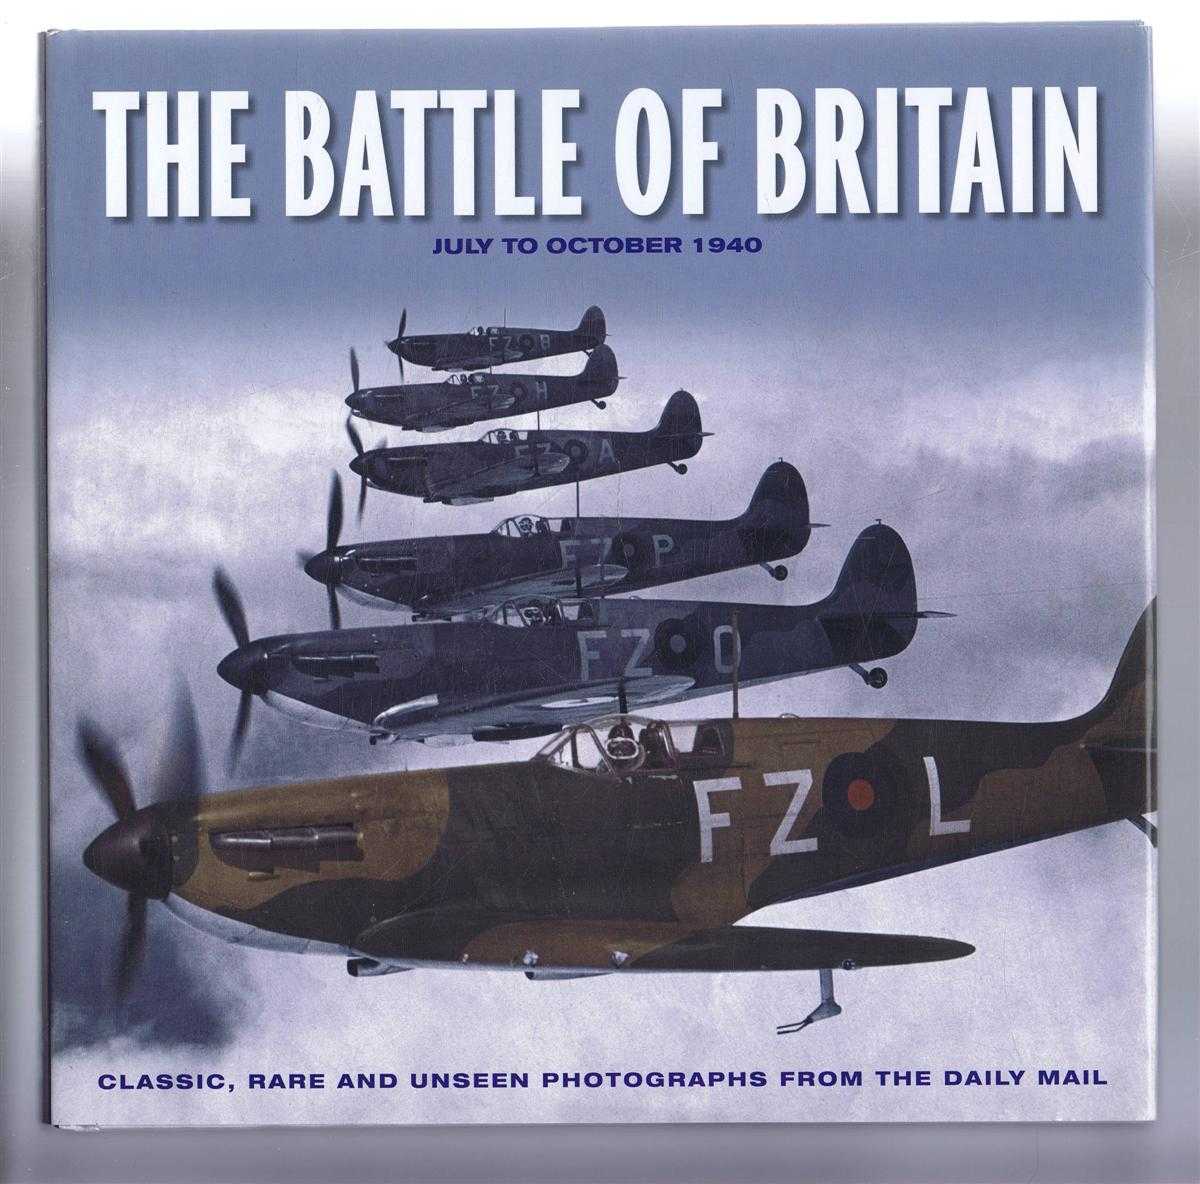 James Alexander - The Battle of Britain, July to October 1940. Classic, Rare and Unseen Photographs from the Daily Mail